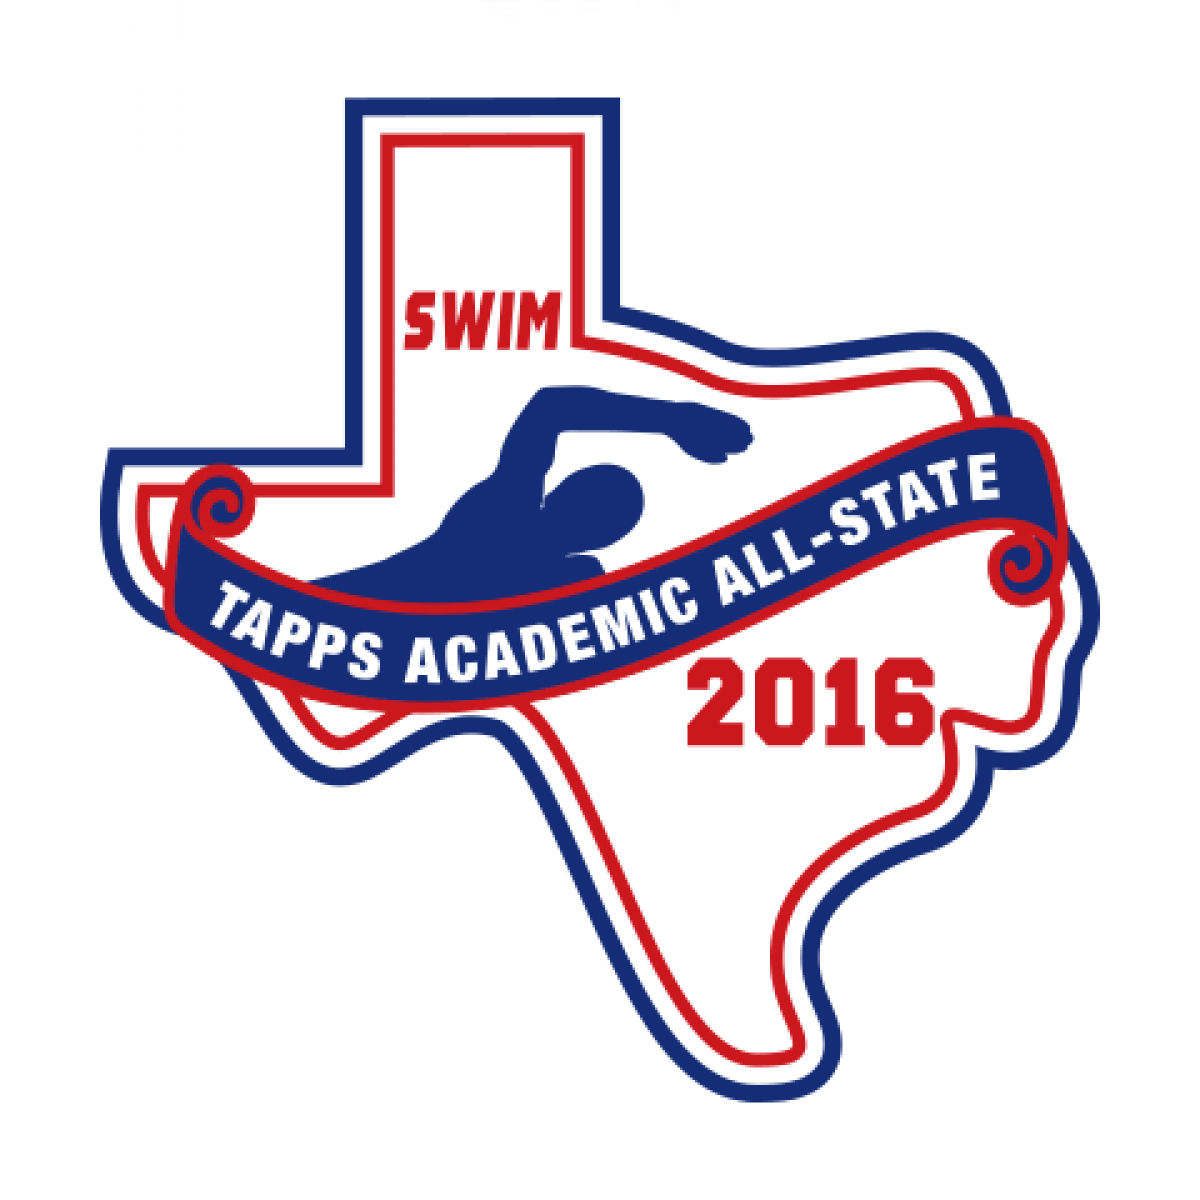 Felt TAPPS 2016 Swim Academic All-State Patch